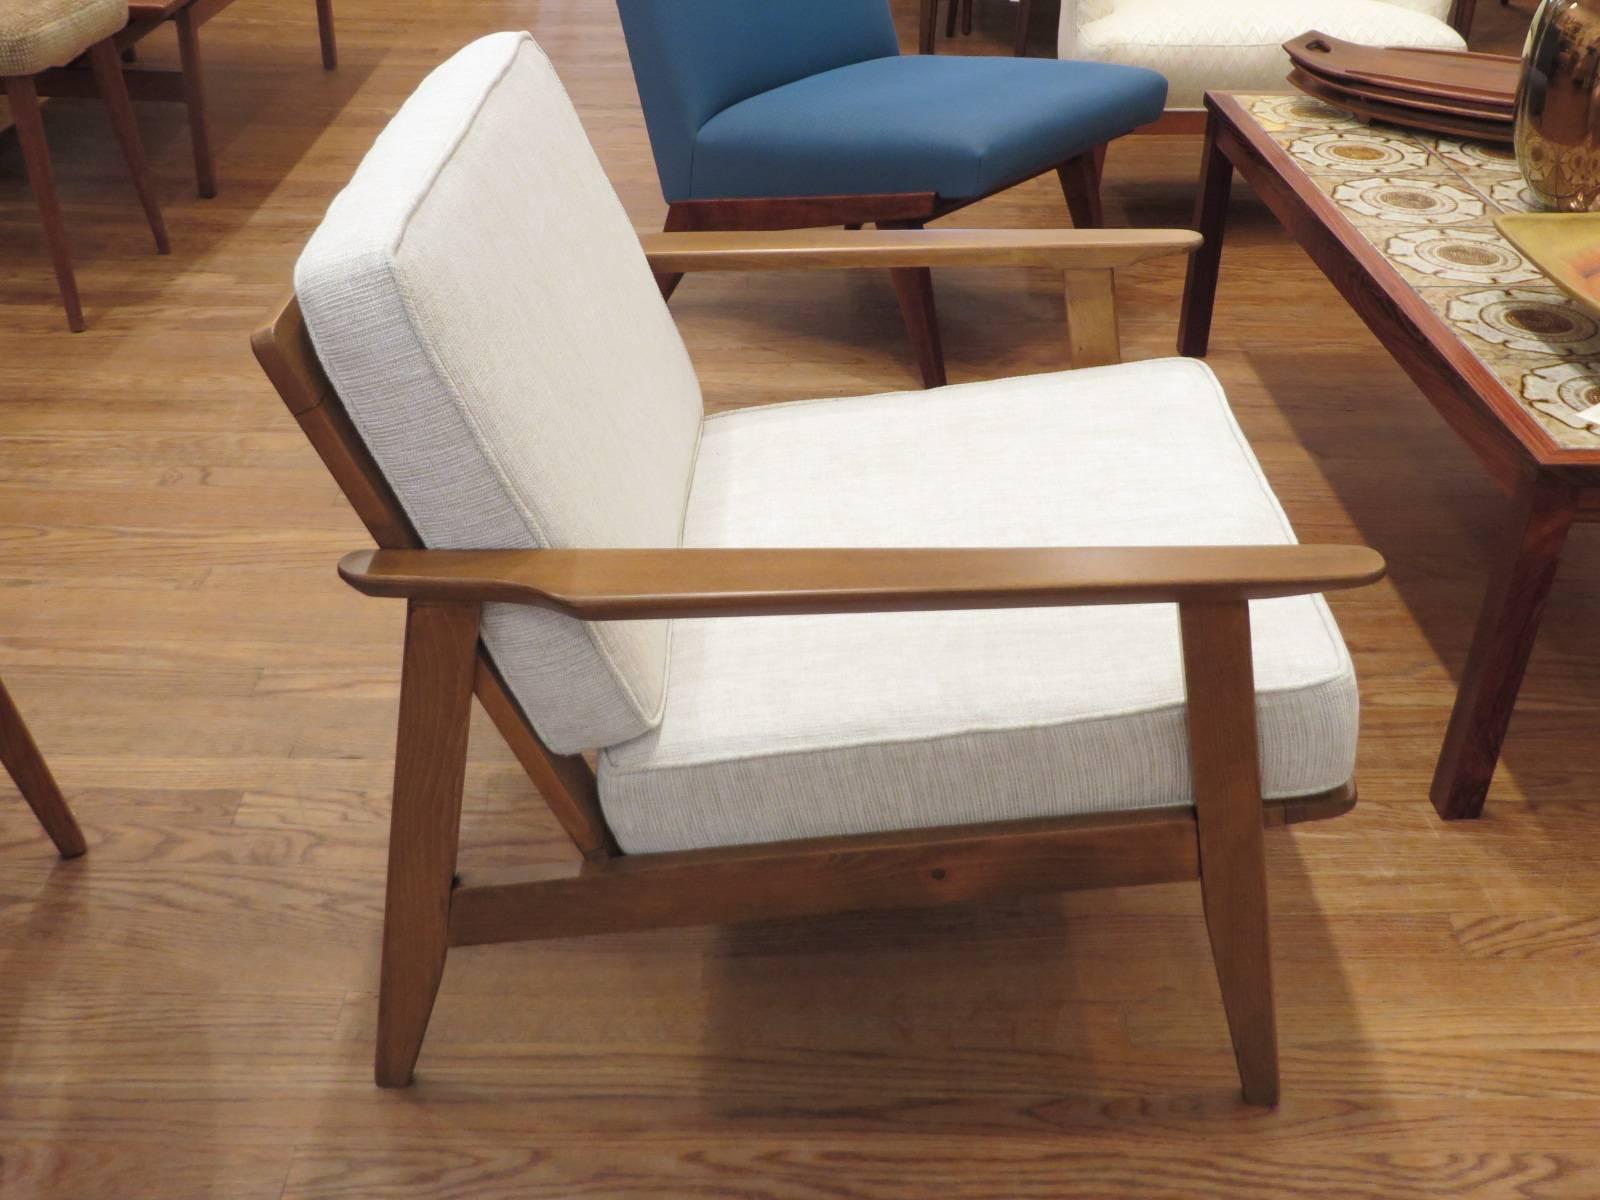 Classic Danish modern armchair newly reupholstered. The chair is very comfortable and perfect for reading or entertaining. Pleasing design will fit into any decor. Great living room or bedroom chair.